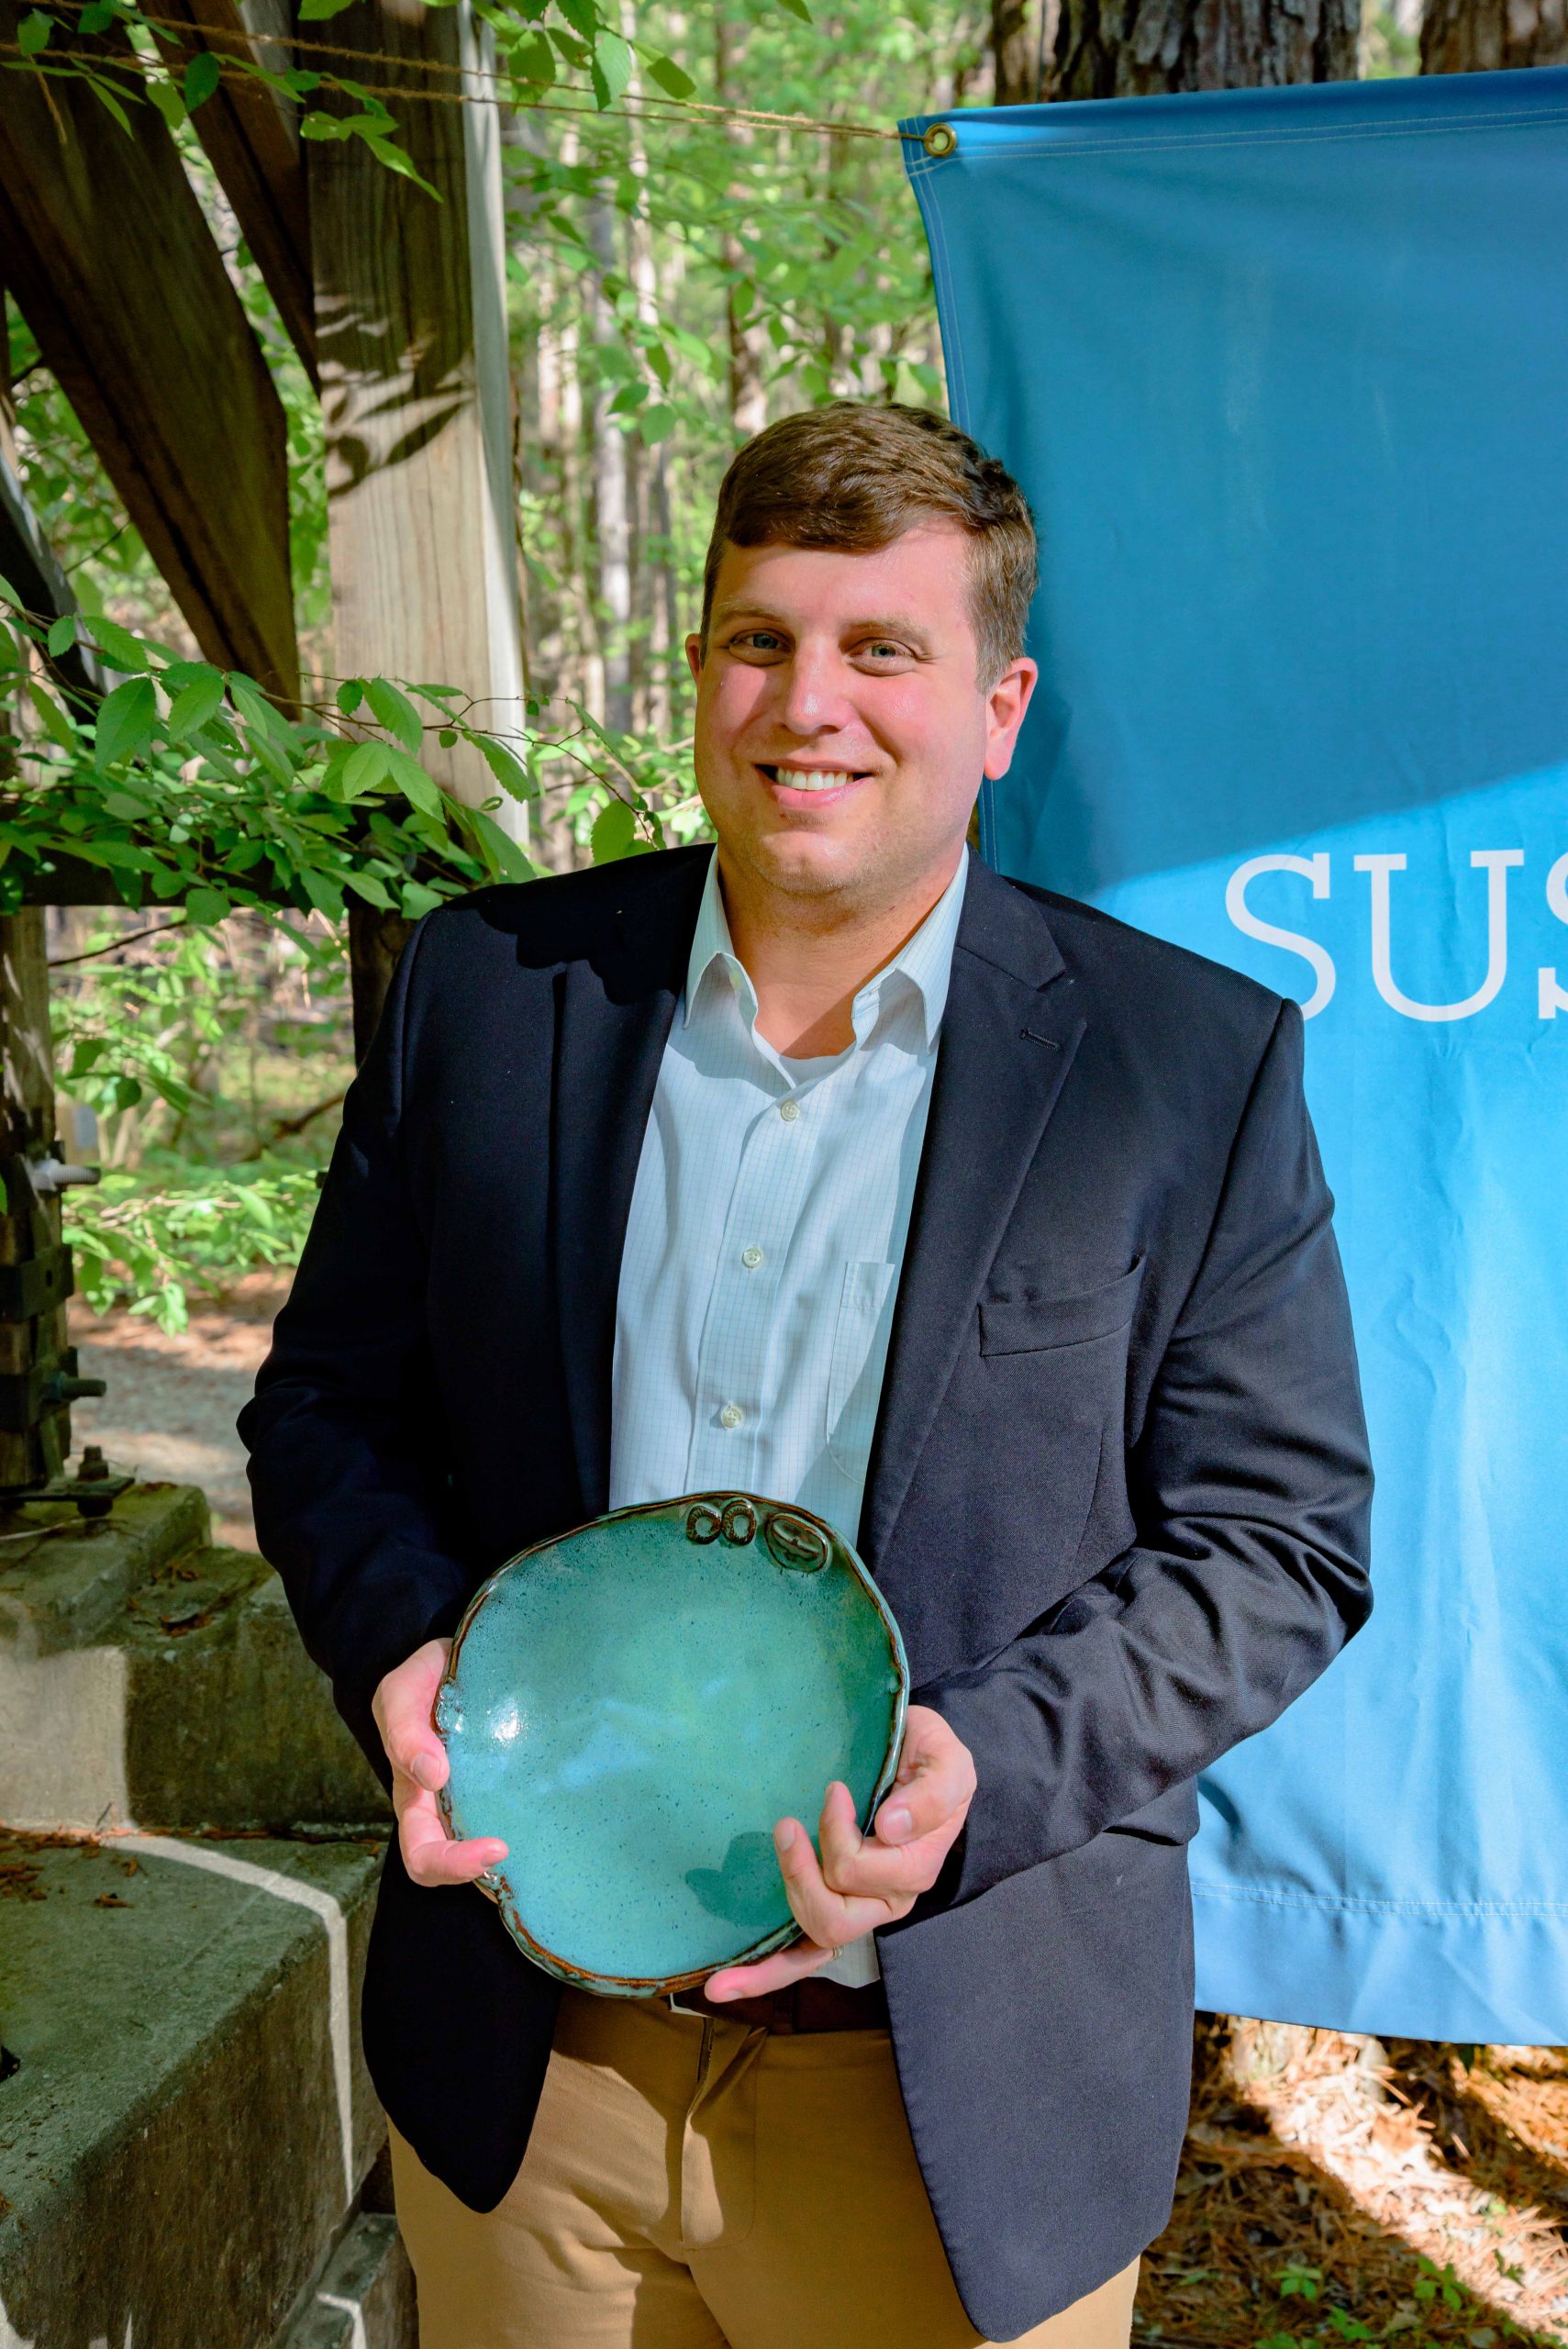 Photo of Ben Burmester with his Spirit of Sustainability Award